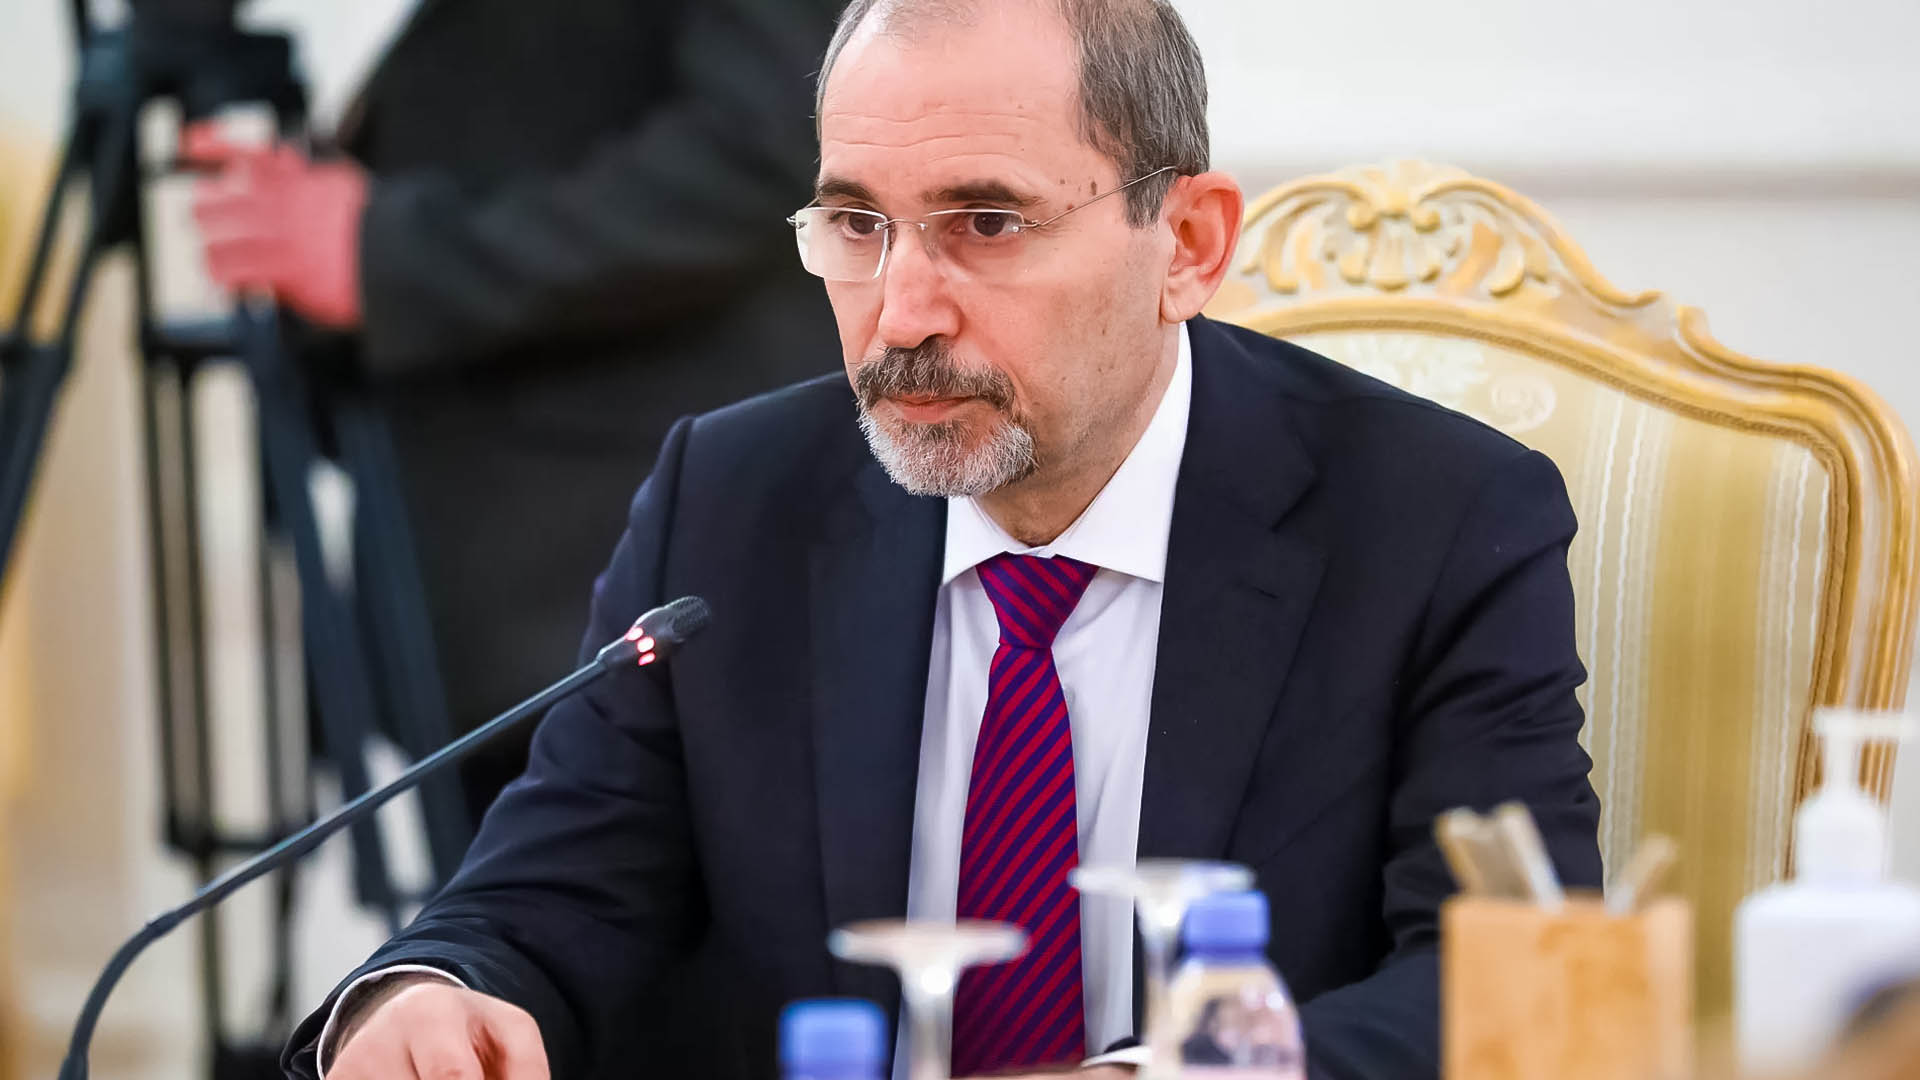 Safadi urges concrete steps to address the effects of the Ukraine crisis